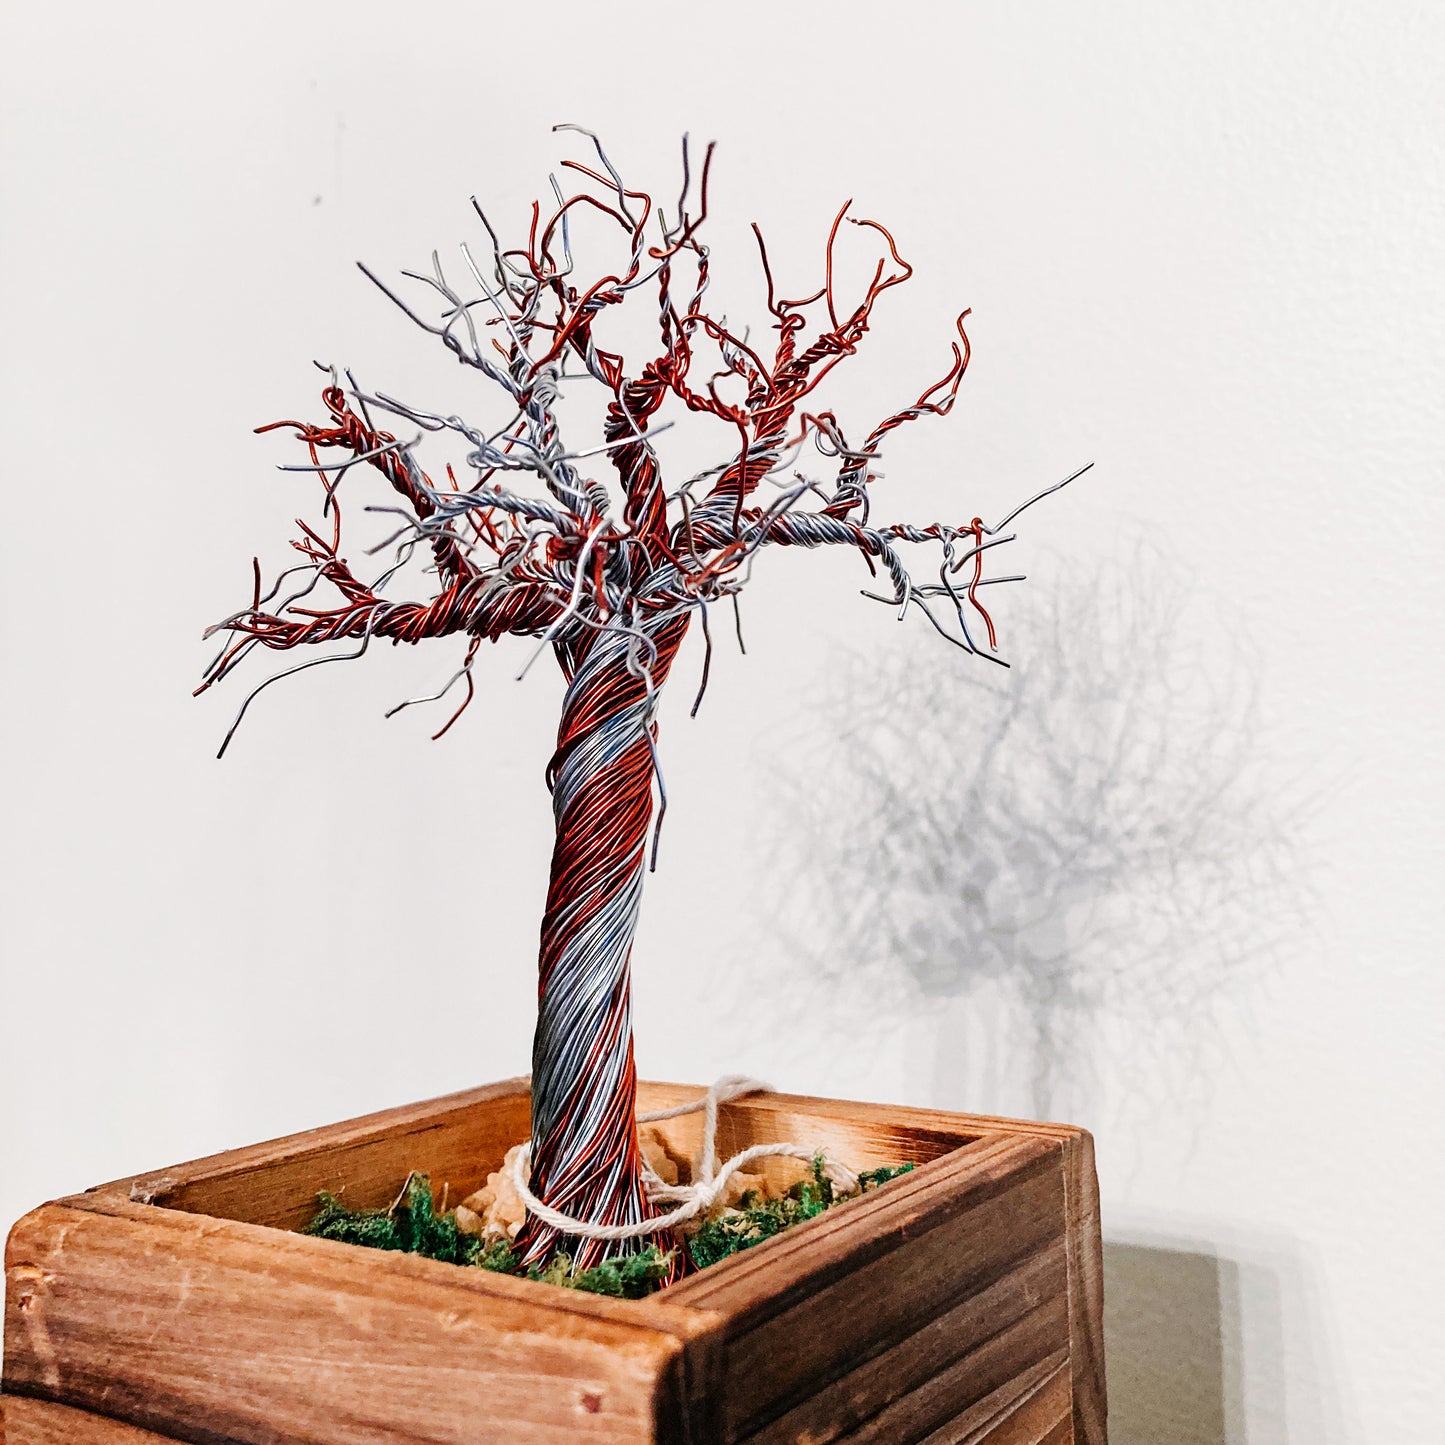 Copper Serenity: 7-½" Twisted Wire Tree in Wooden Box by Don Corn